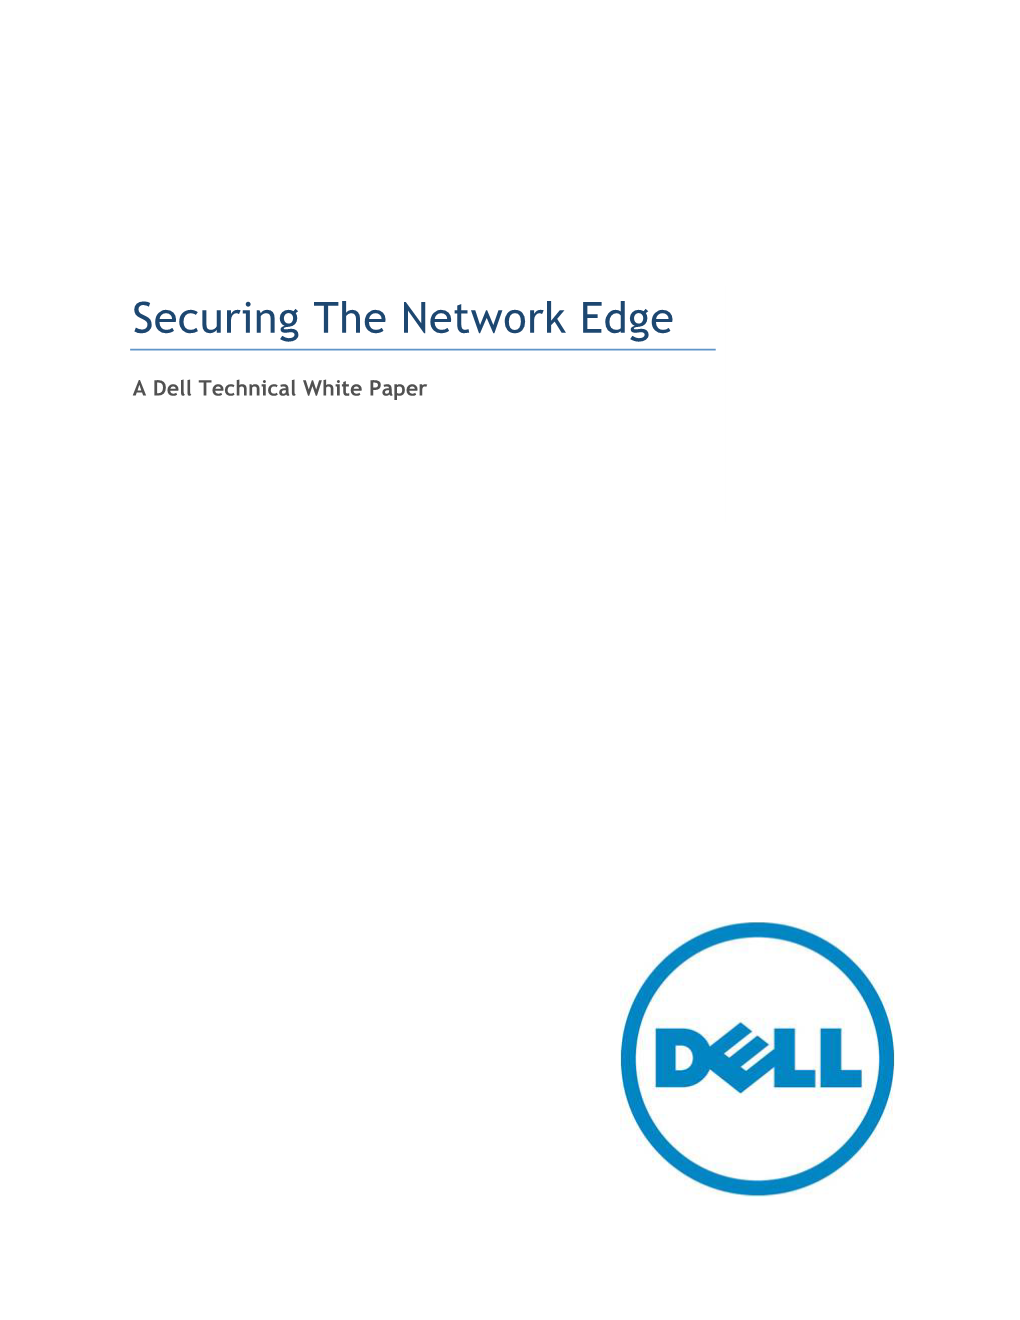 Securing the Network Edge